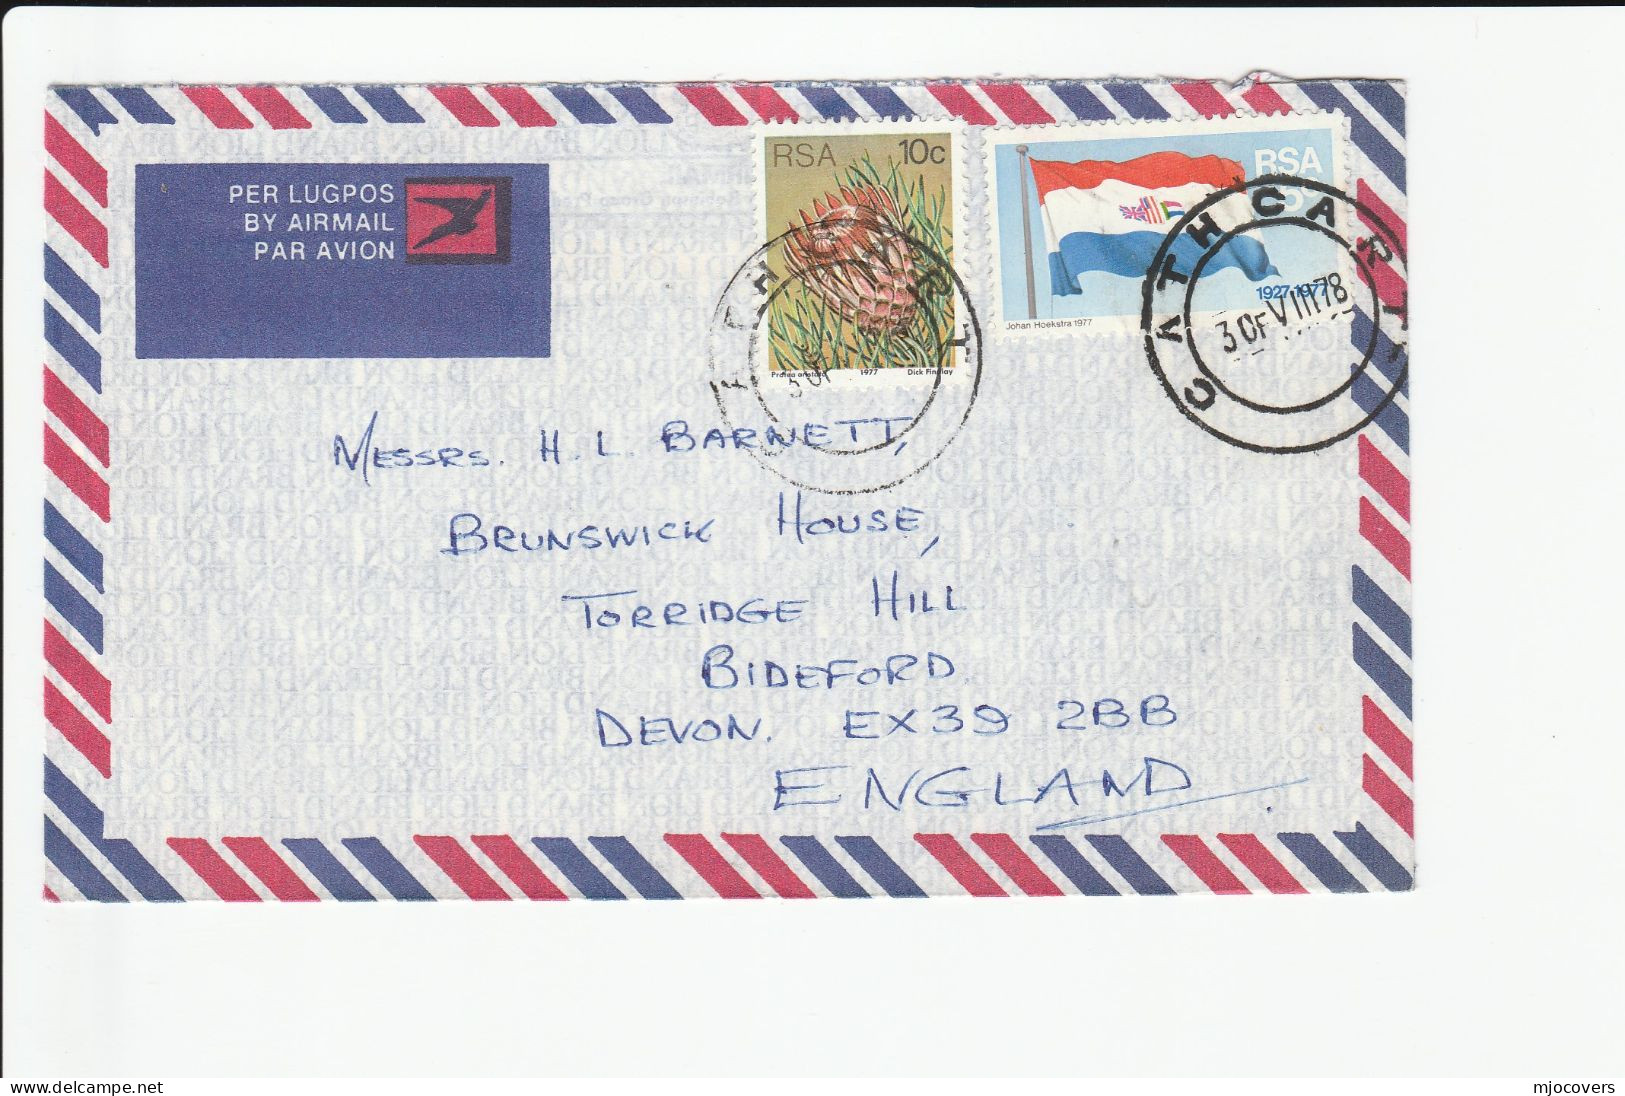 FLAGS - 1978 -1994 SOUTH AFRICA Covers FLAG Stamps Cover Air Mail To GB - Covers